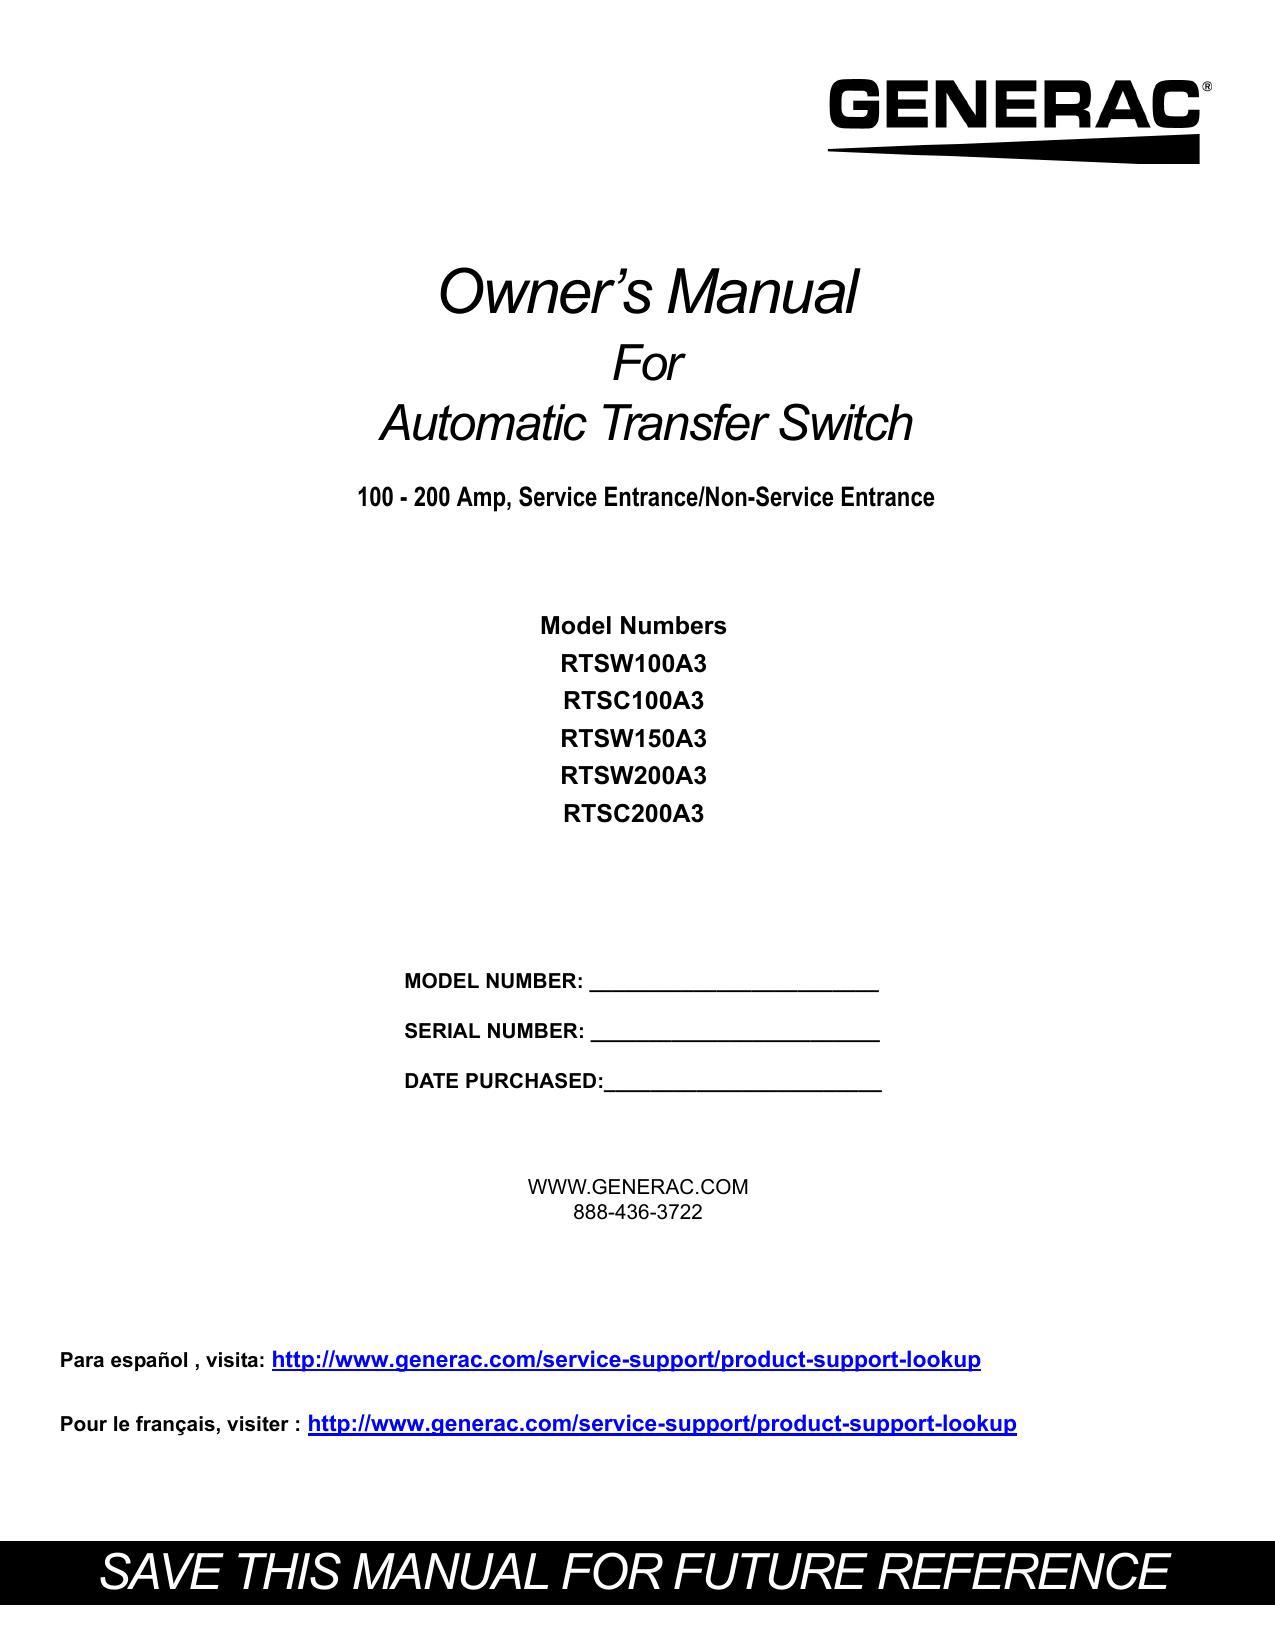 owners-manual-for-automatic-transfer-switch-model-numbers-rtswiooa3-rtsciooa3-rtsw1soa3-rtswzooa3-rtsczooa3.pdf